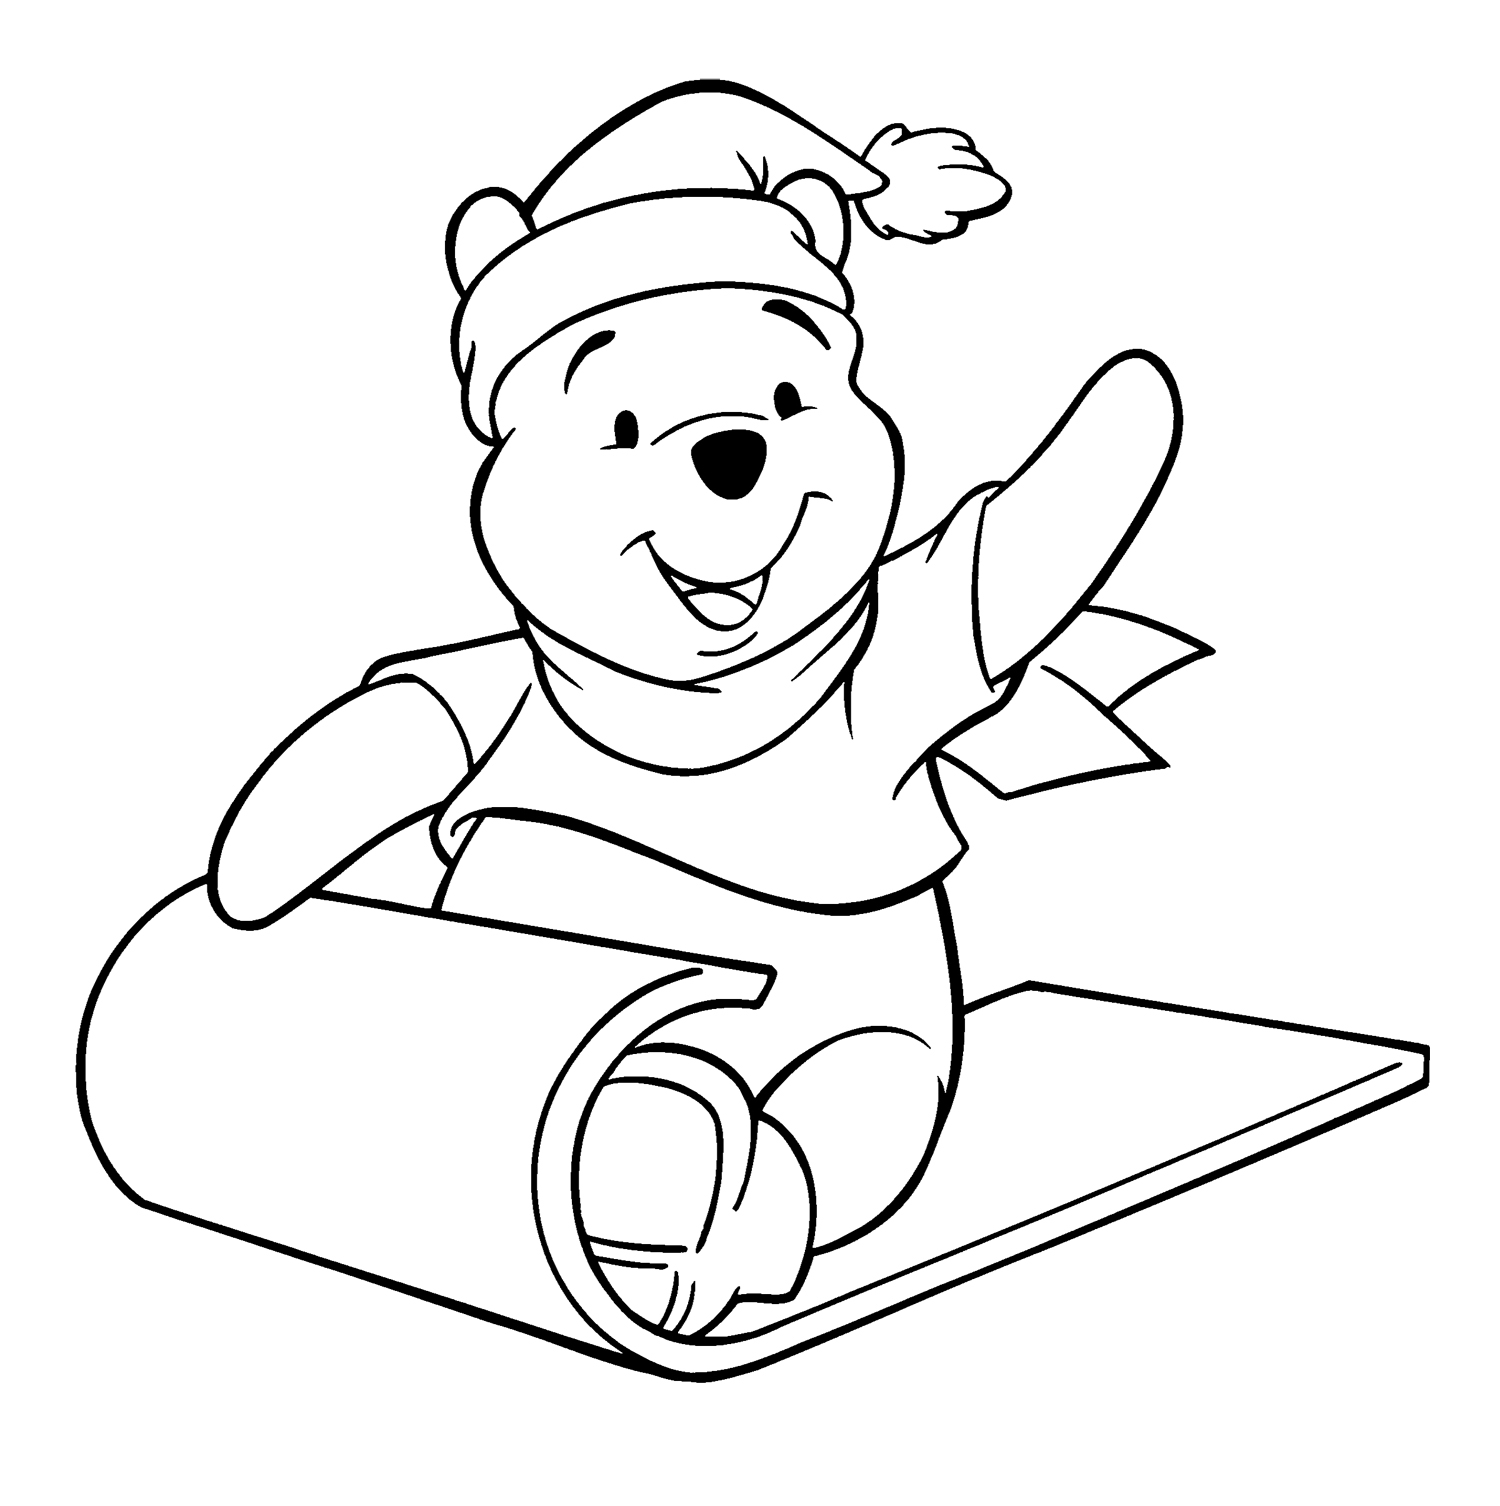 Winnie The Pooh Coloring Pages | Free download on ClipArtMag